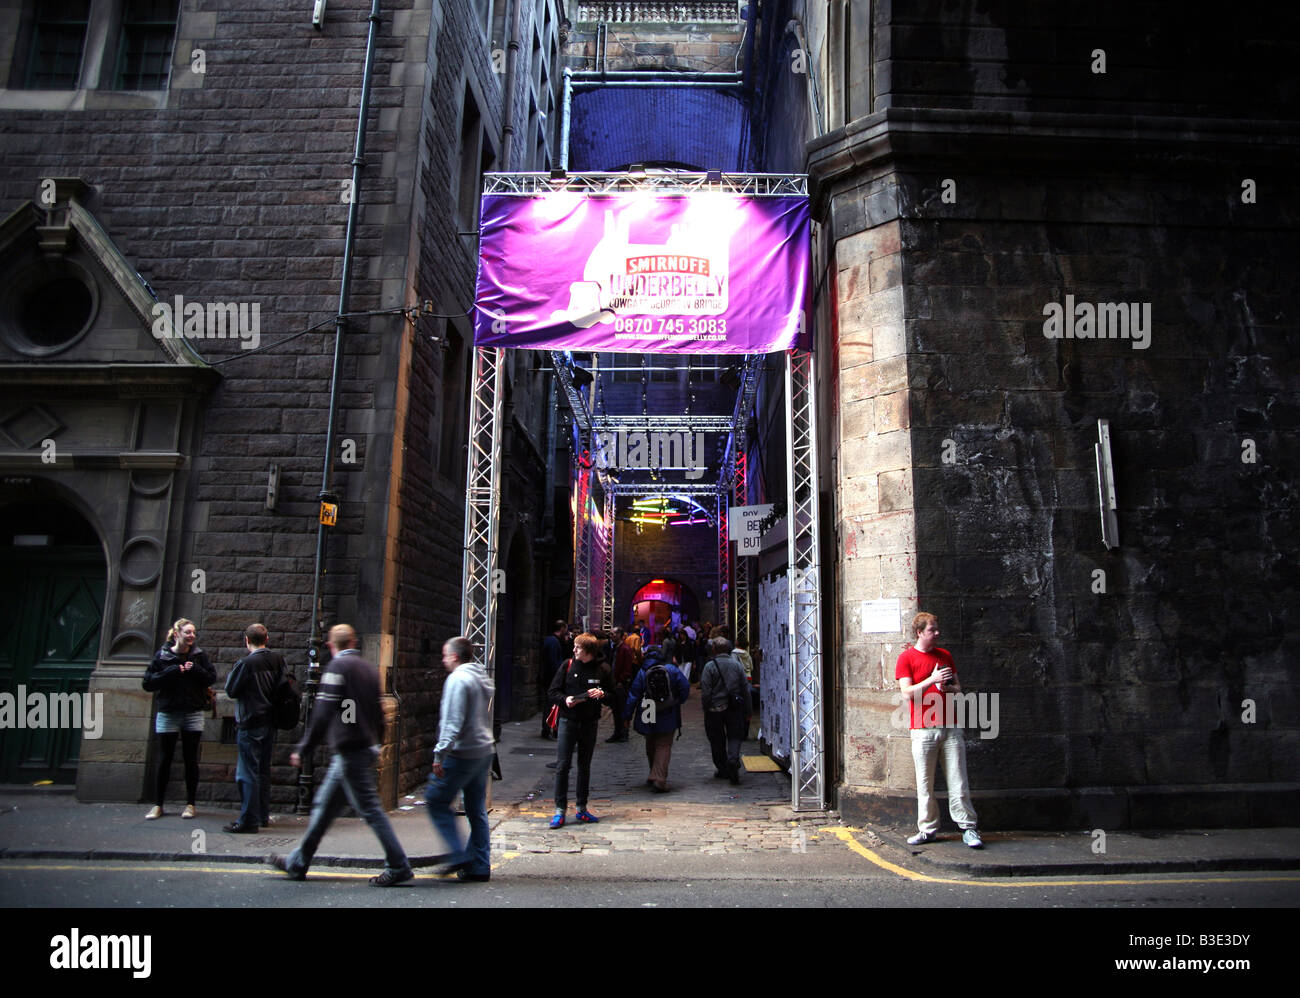 Entrance to the Underbelly, one of the main Edinburgh Fringe Festival venues Stock Photo